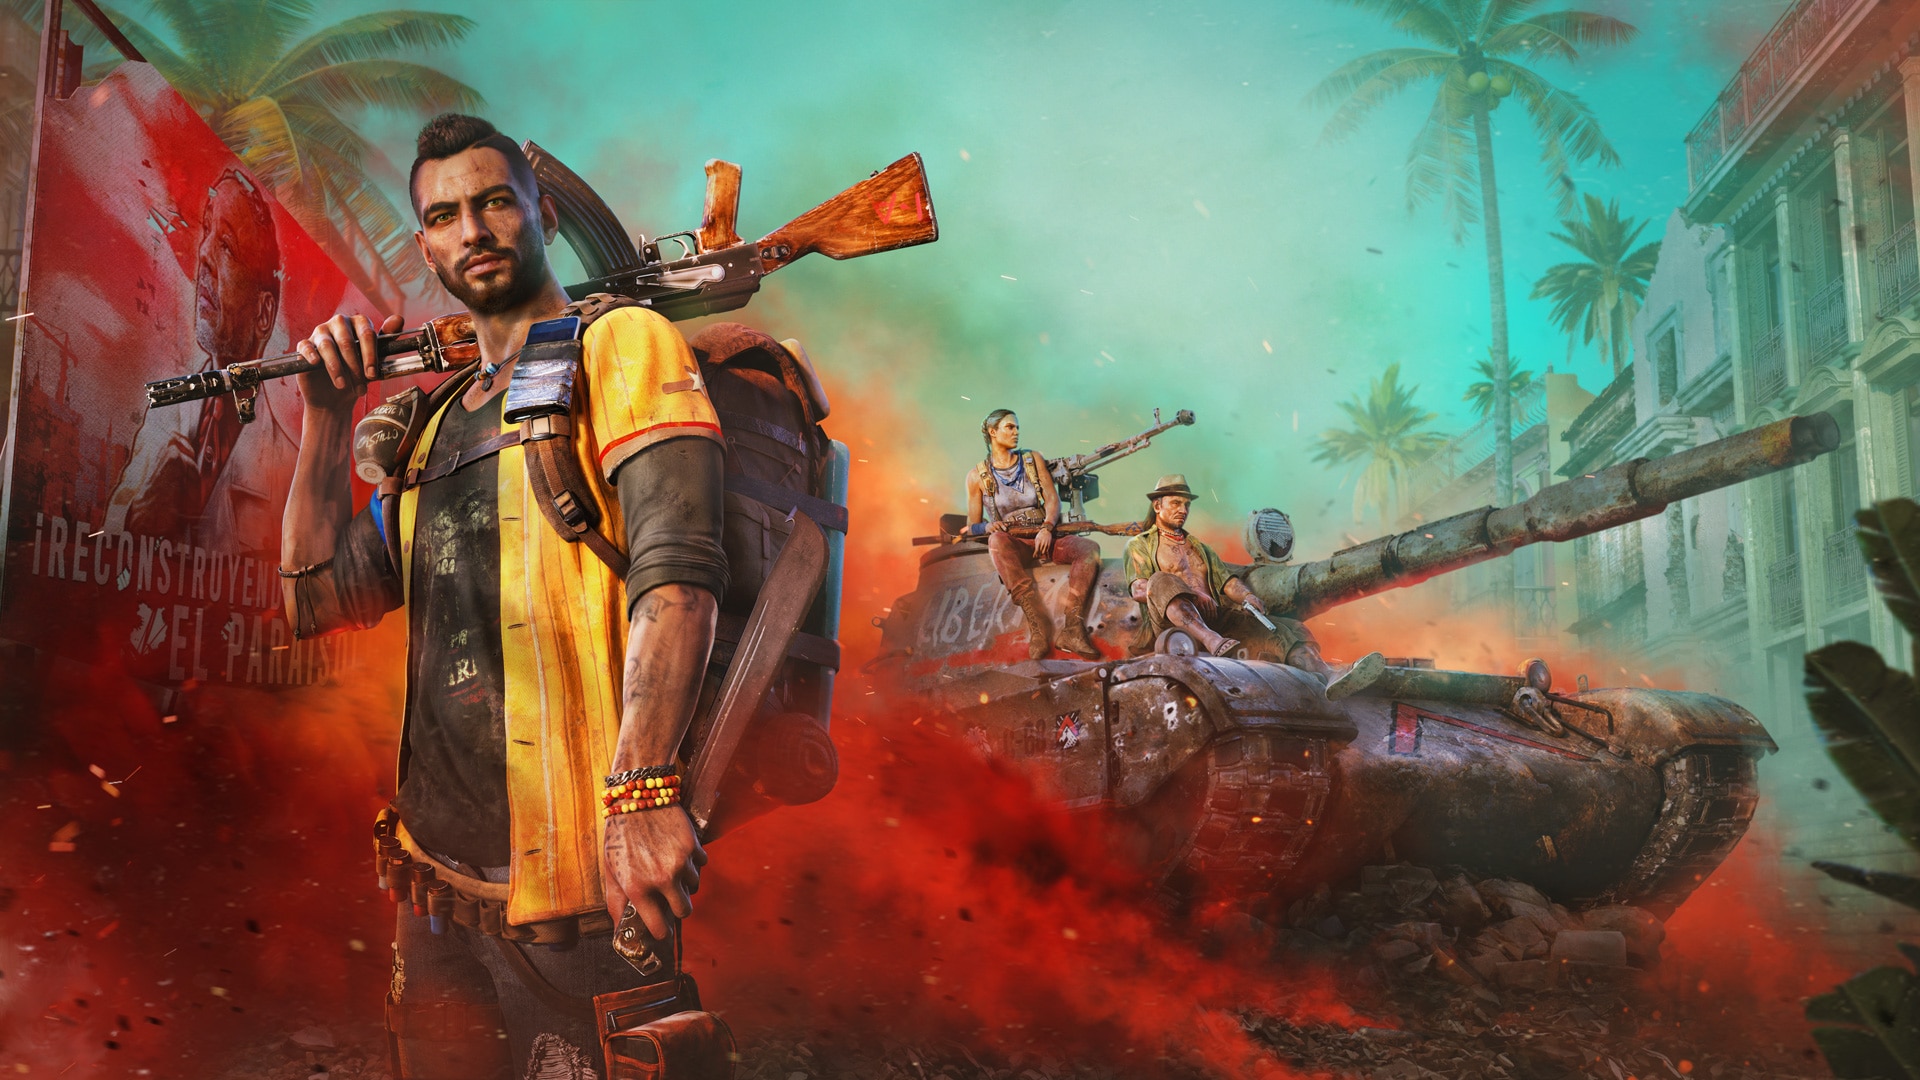 FAR CRY 6 | Download and Play Far Cry 6 by Ubisoft